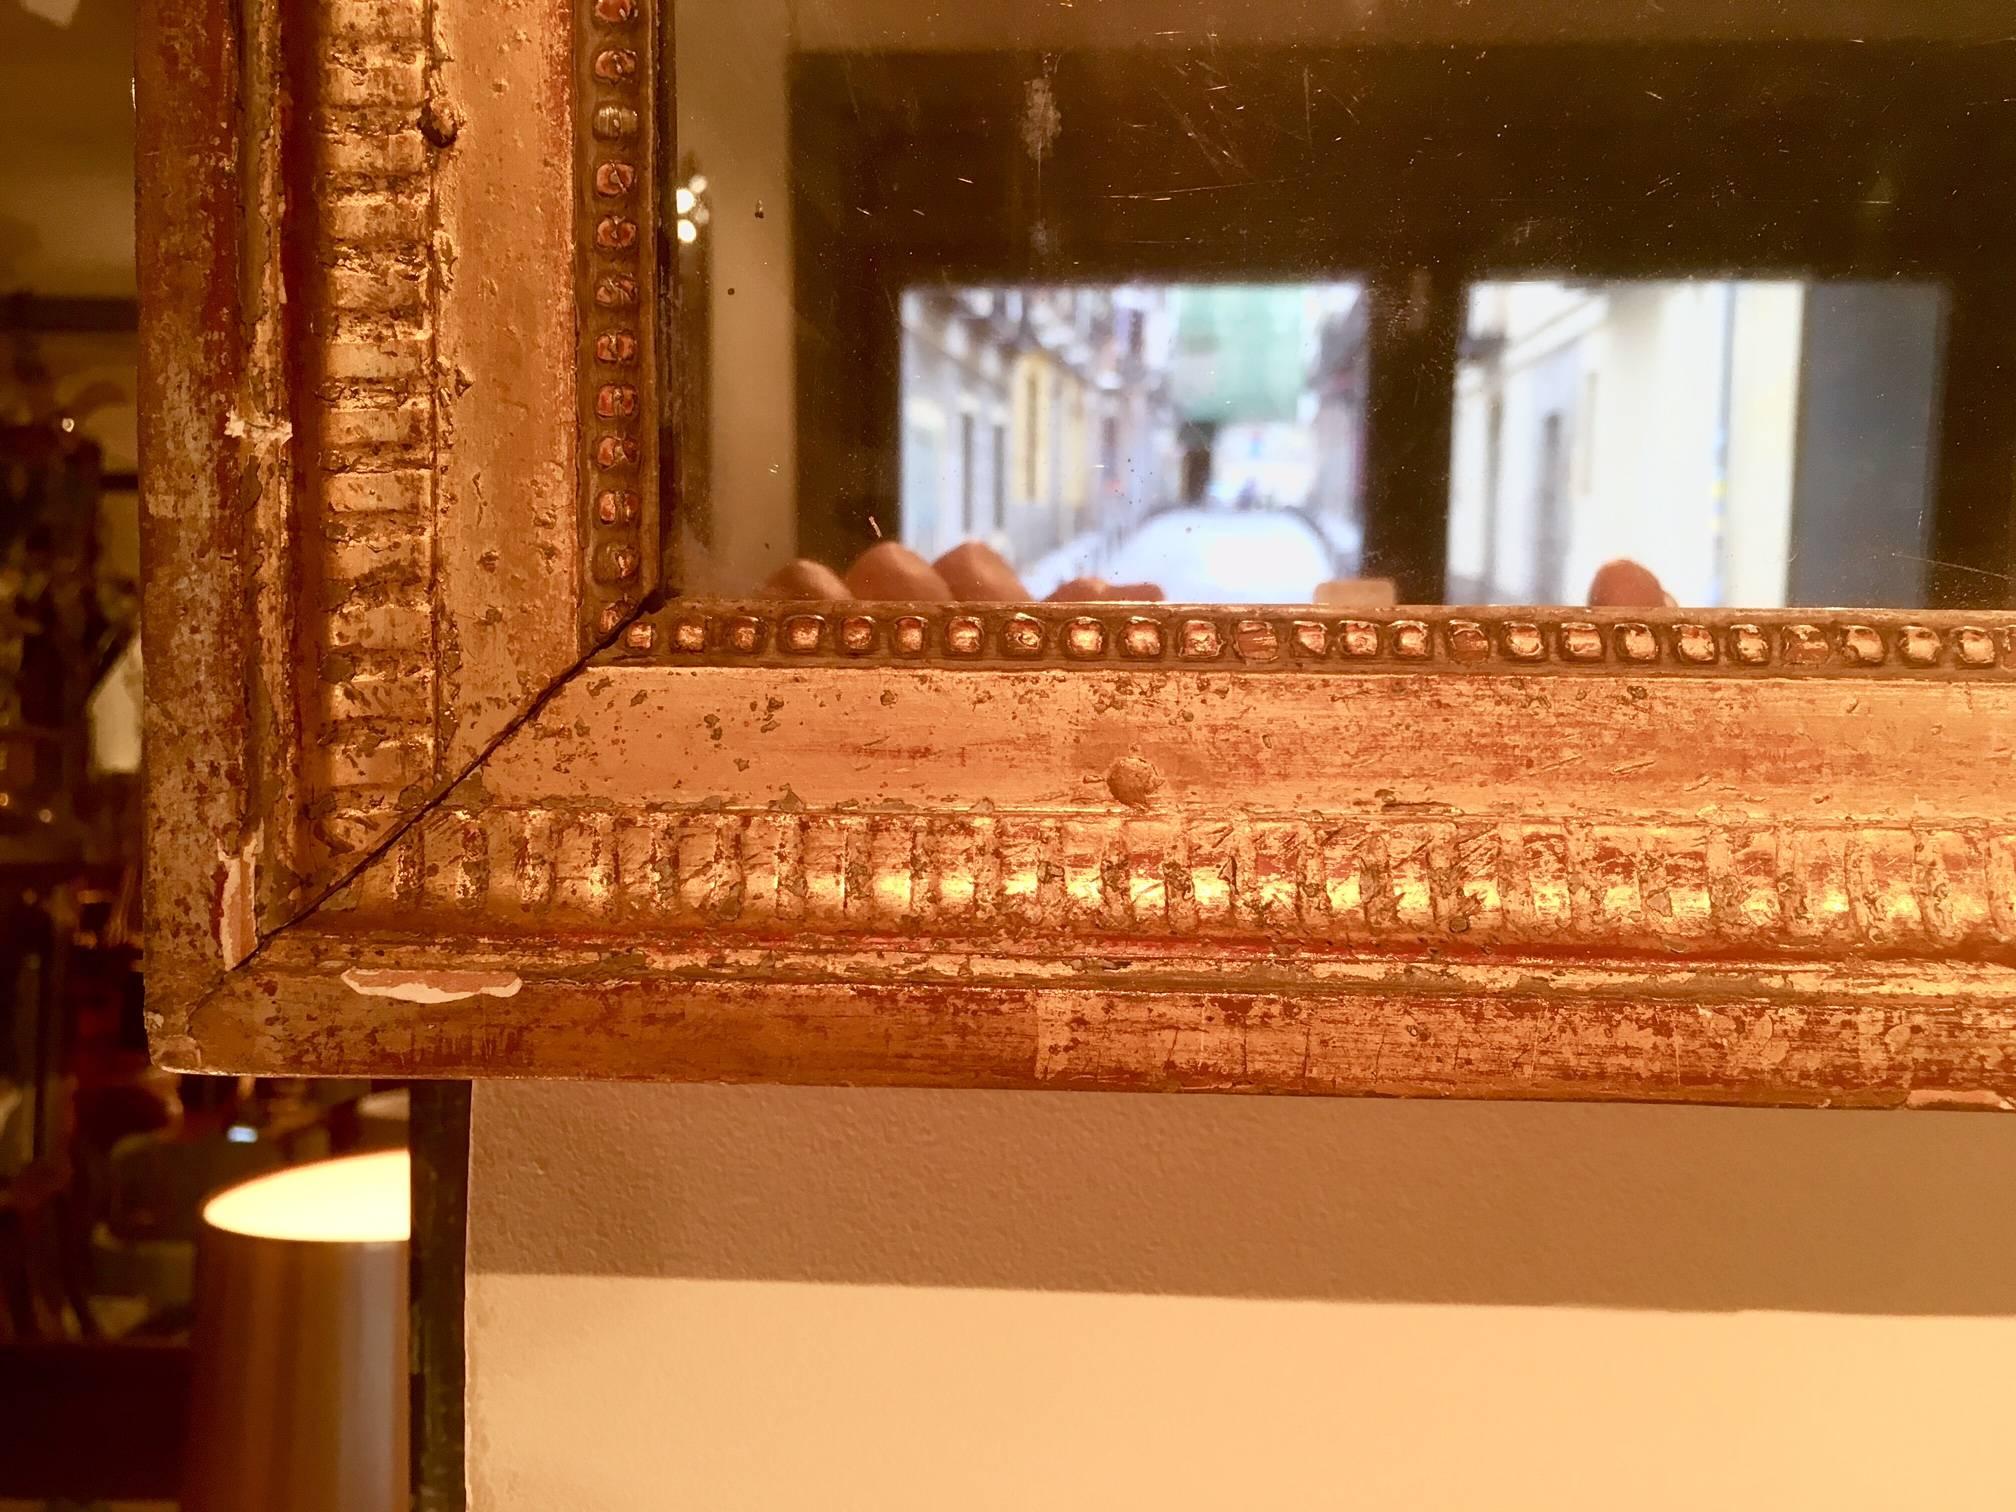 Louis XVI period giltwood mirror, 18th century with two-part mercury plate (original).
The gilded frame bordered in acanthus leaf decoration.